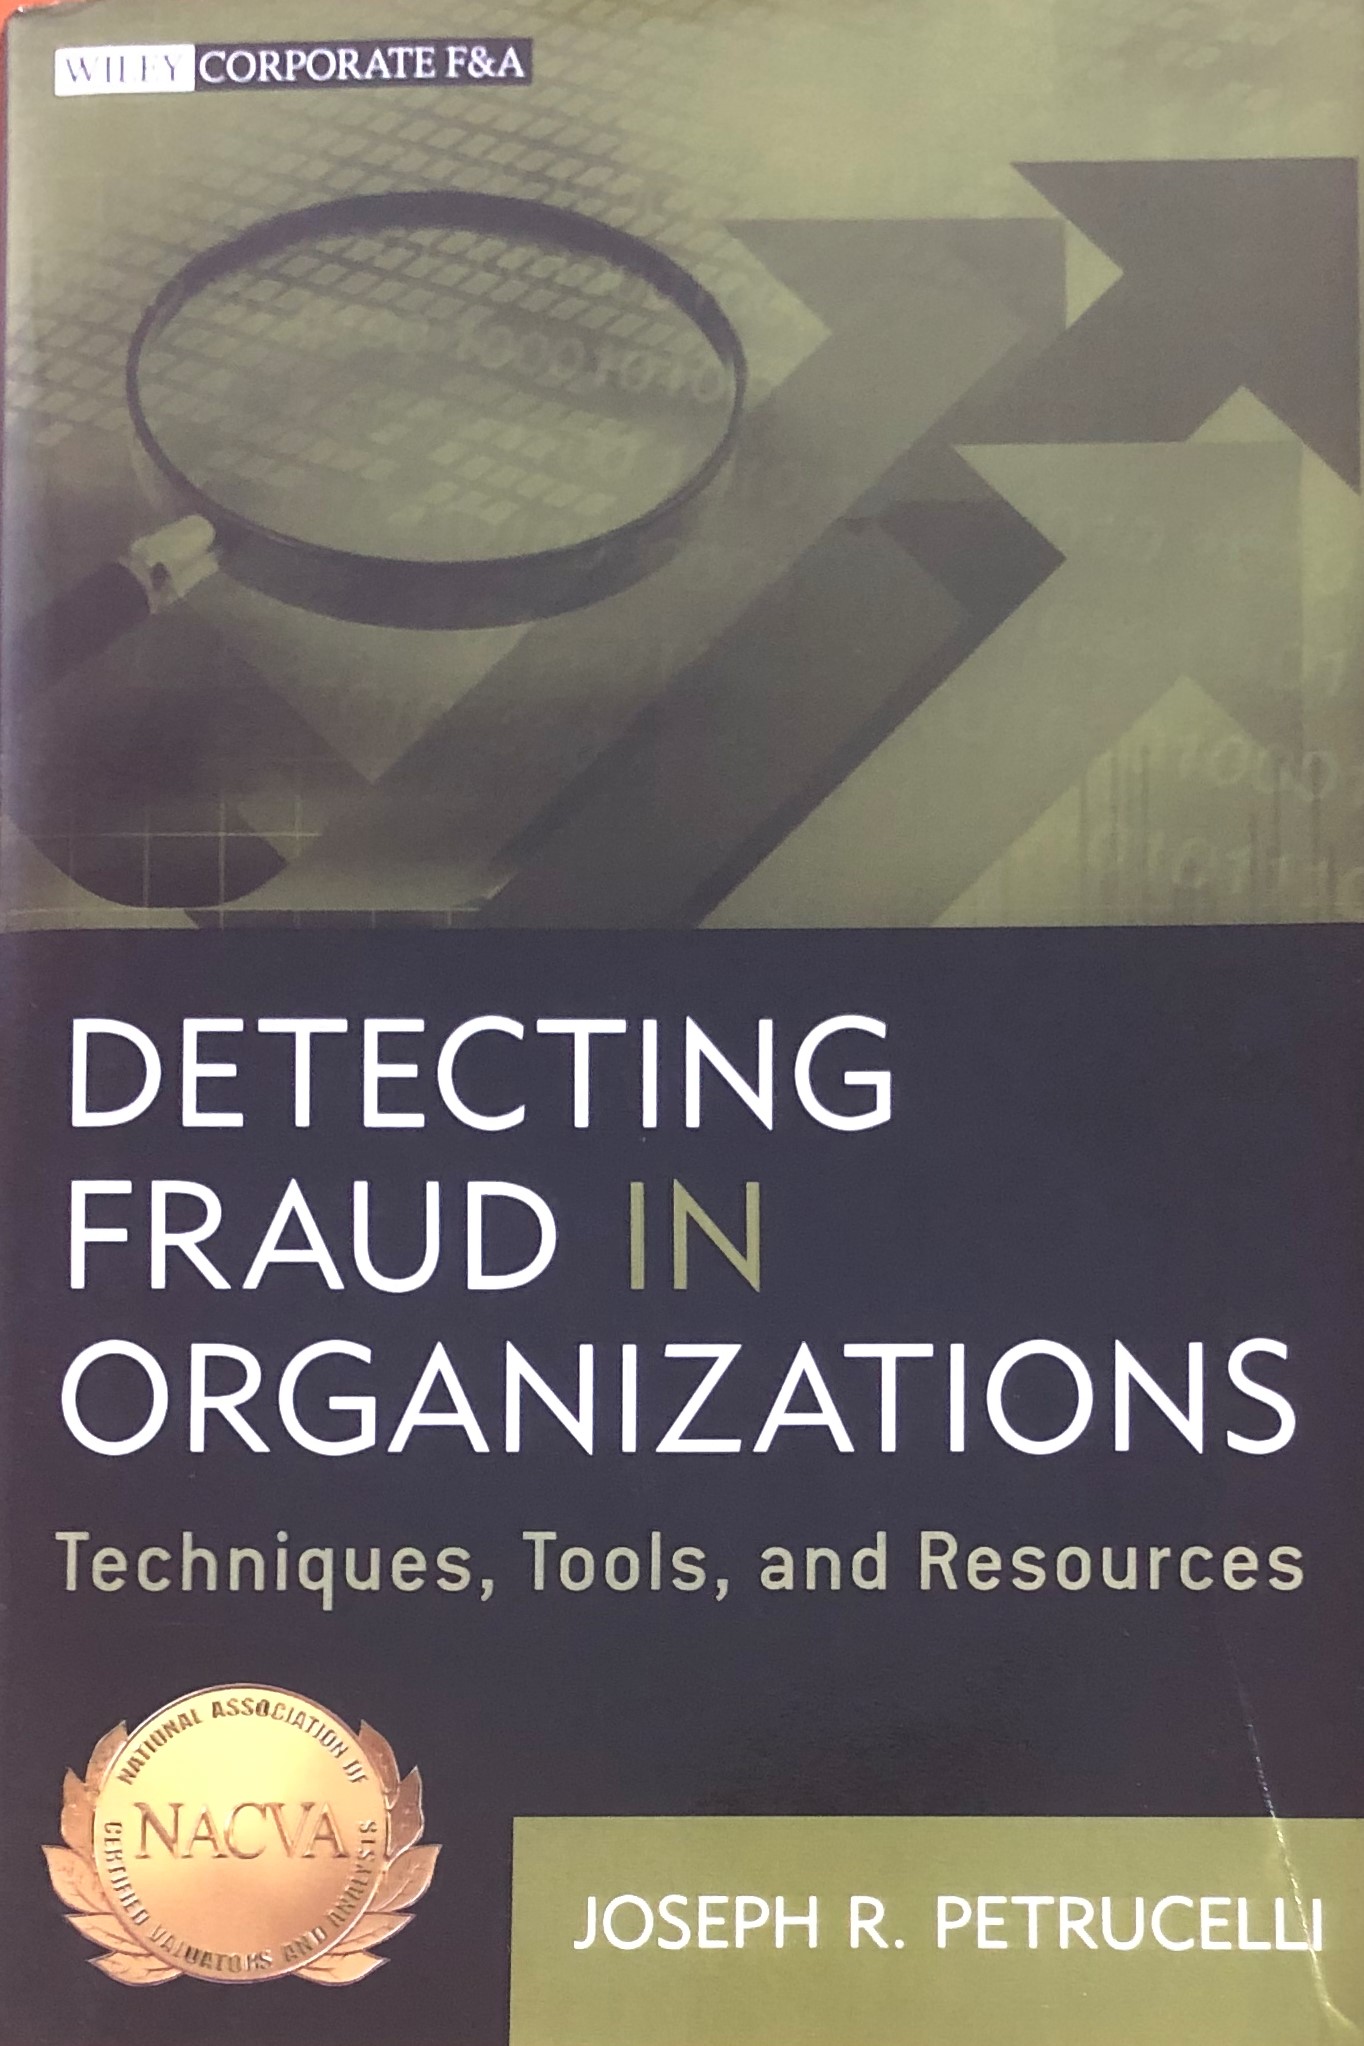 Description Detecting Fraud in Organizations: Techniques, Tools and Resources